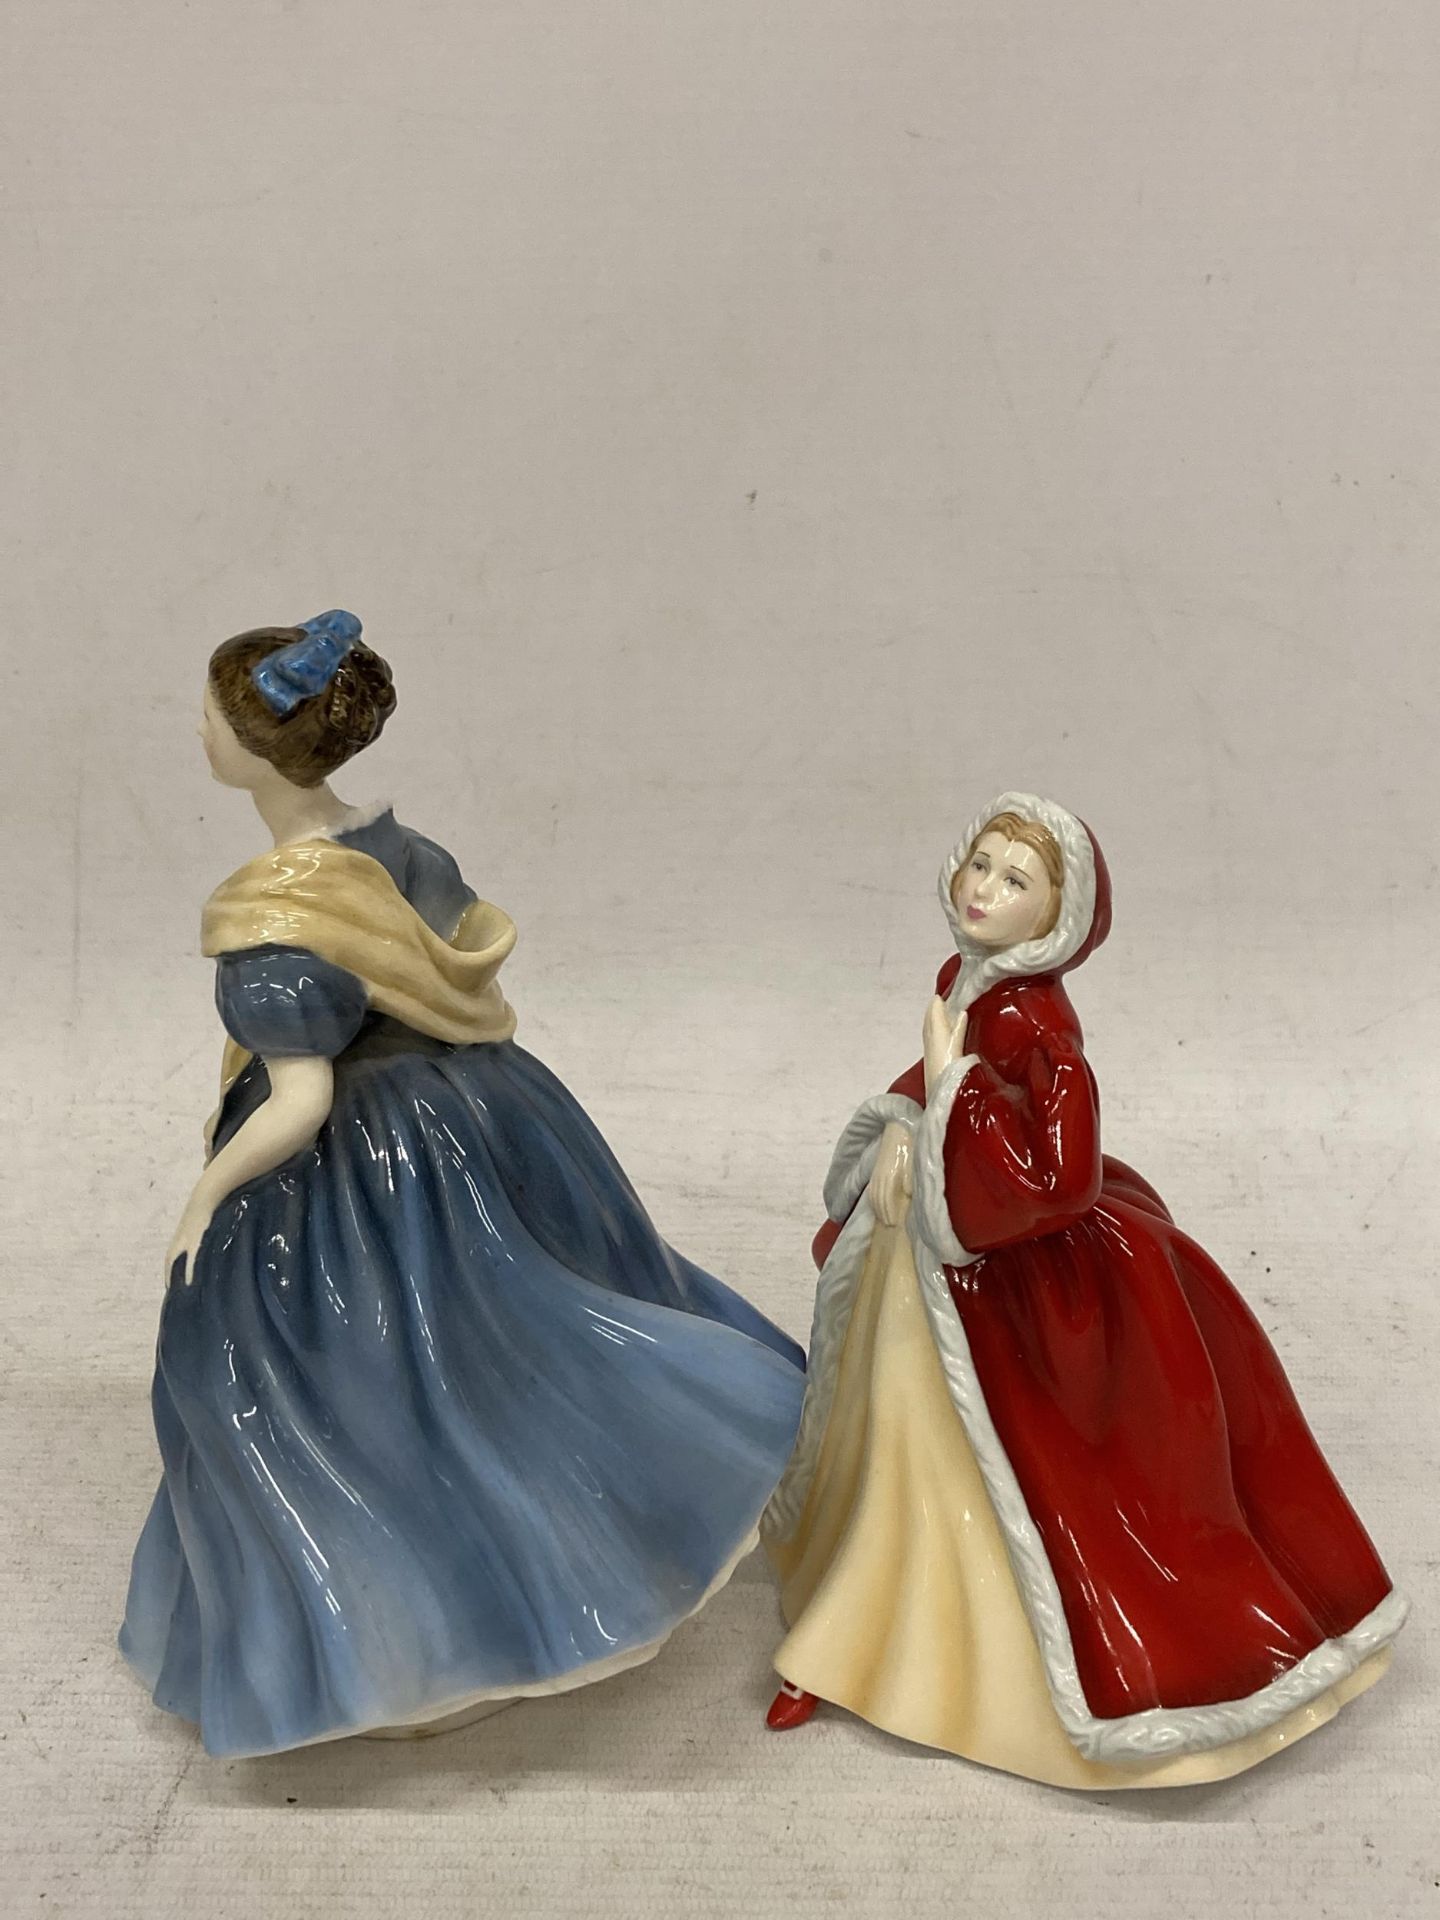 TWO ROYAL DOULTON FIGURINES "ADRIENNE" HN2304 AND FROM THE PRETTY LADIES BEST OF THE CLASSICS - Image 3 of 4